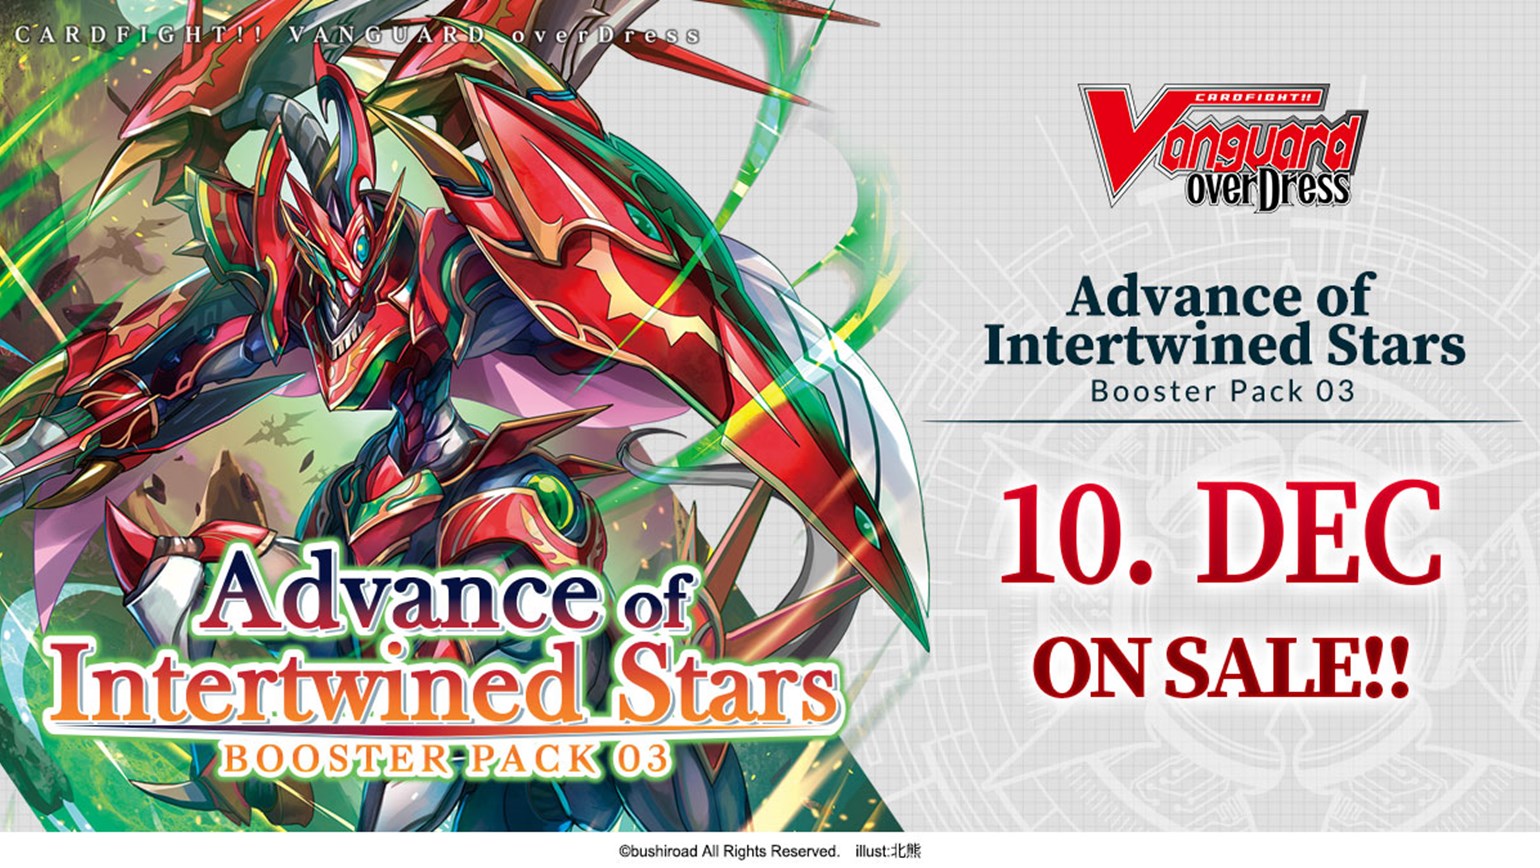 New English Edition overDress Booster Pack 03: Advance of Intertwined Stars, Coming to Stores on December 17th!